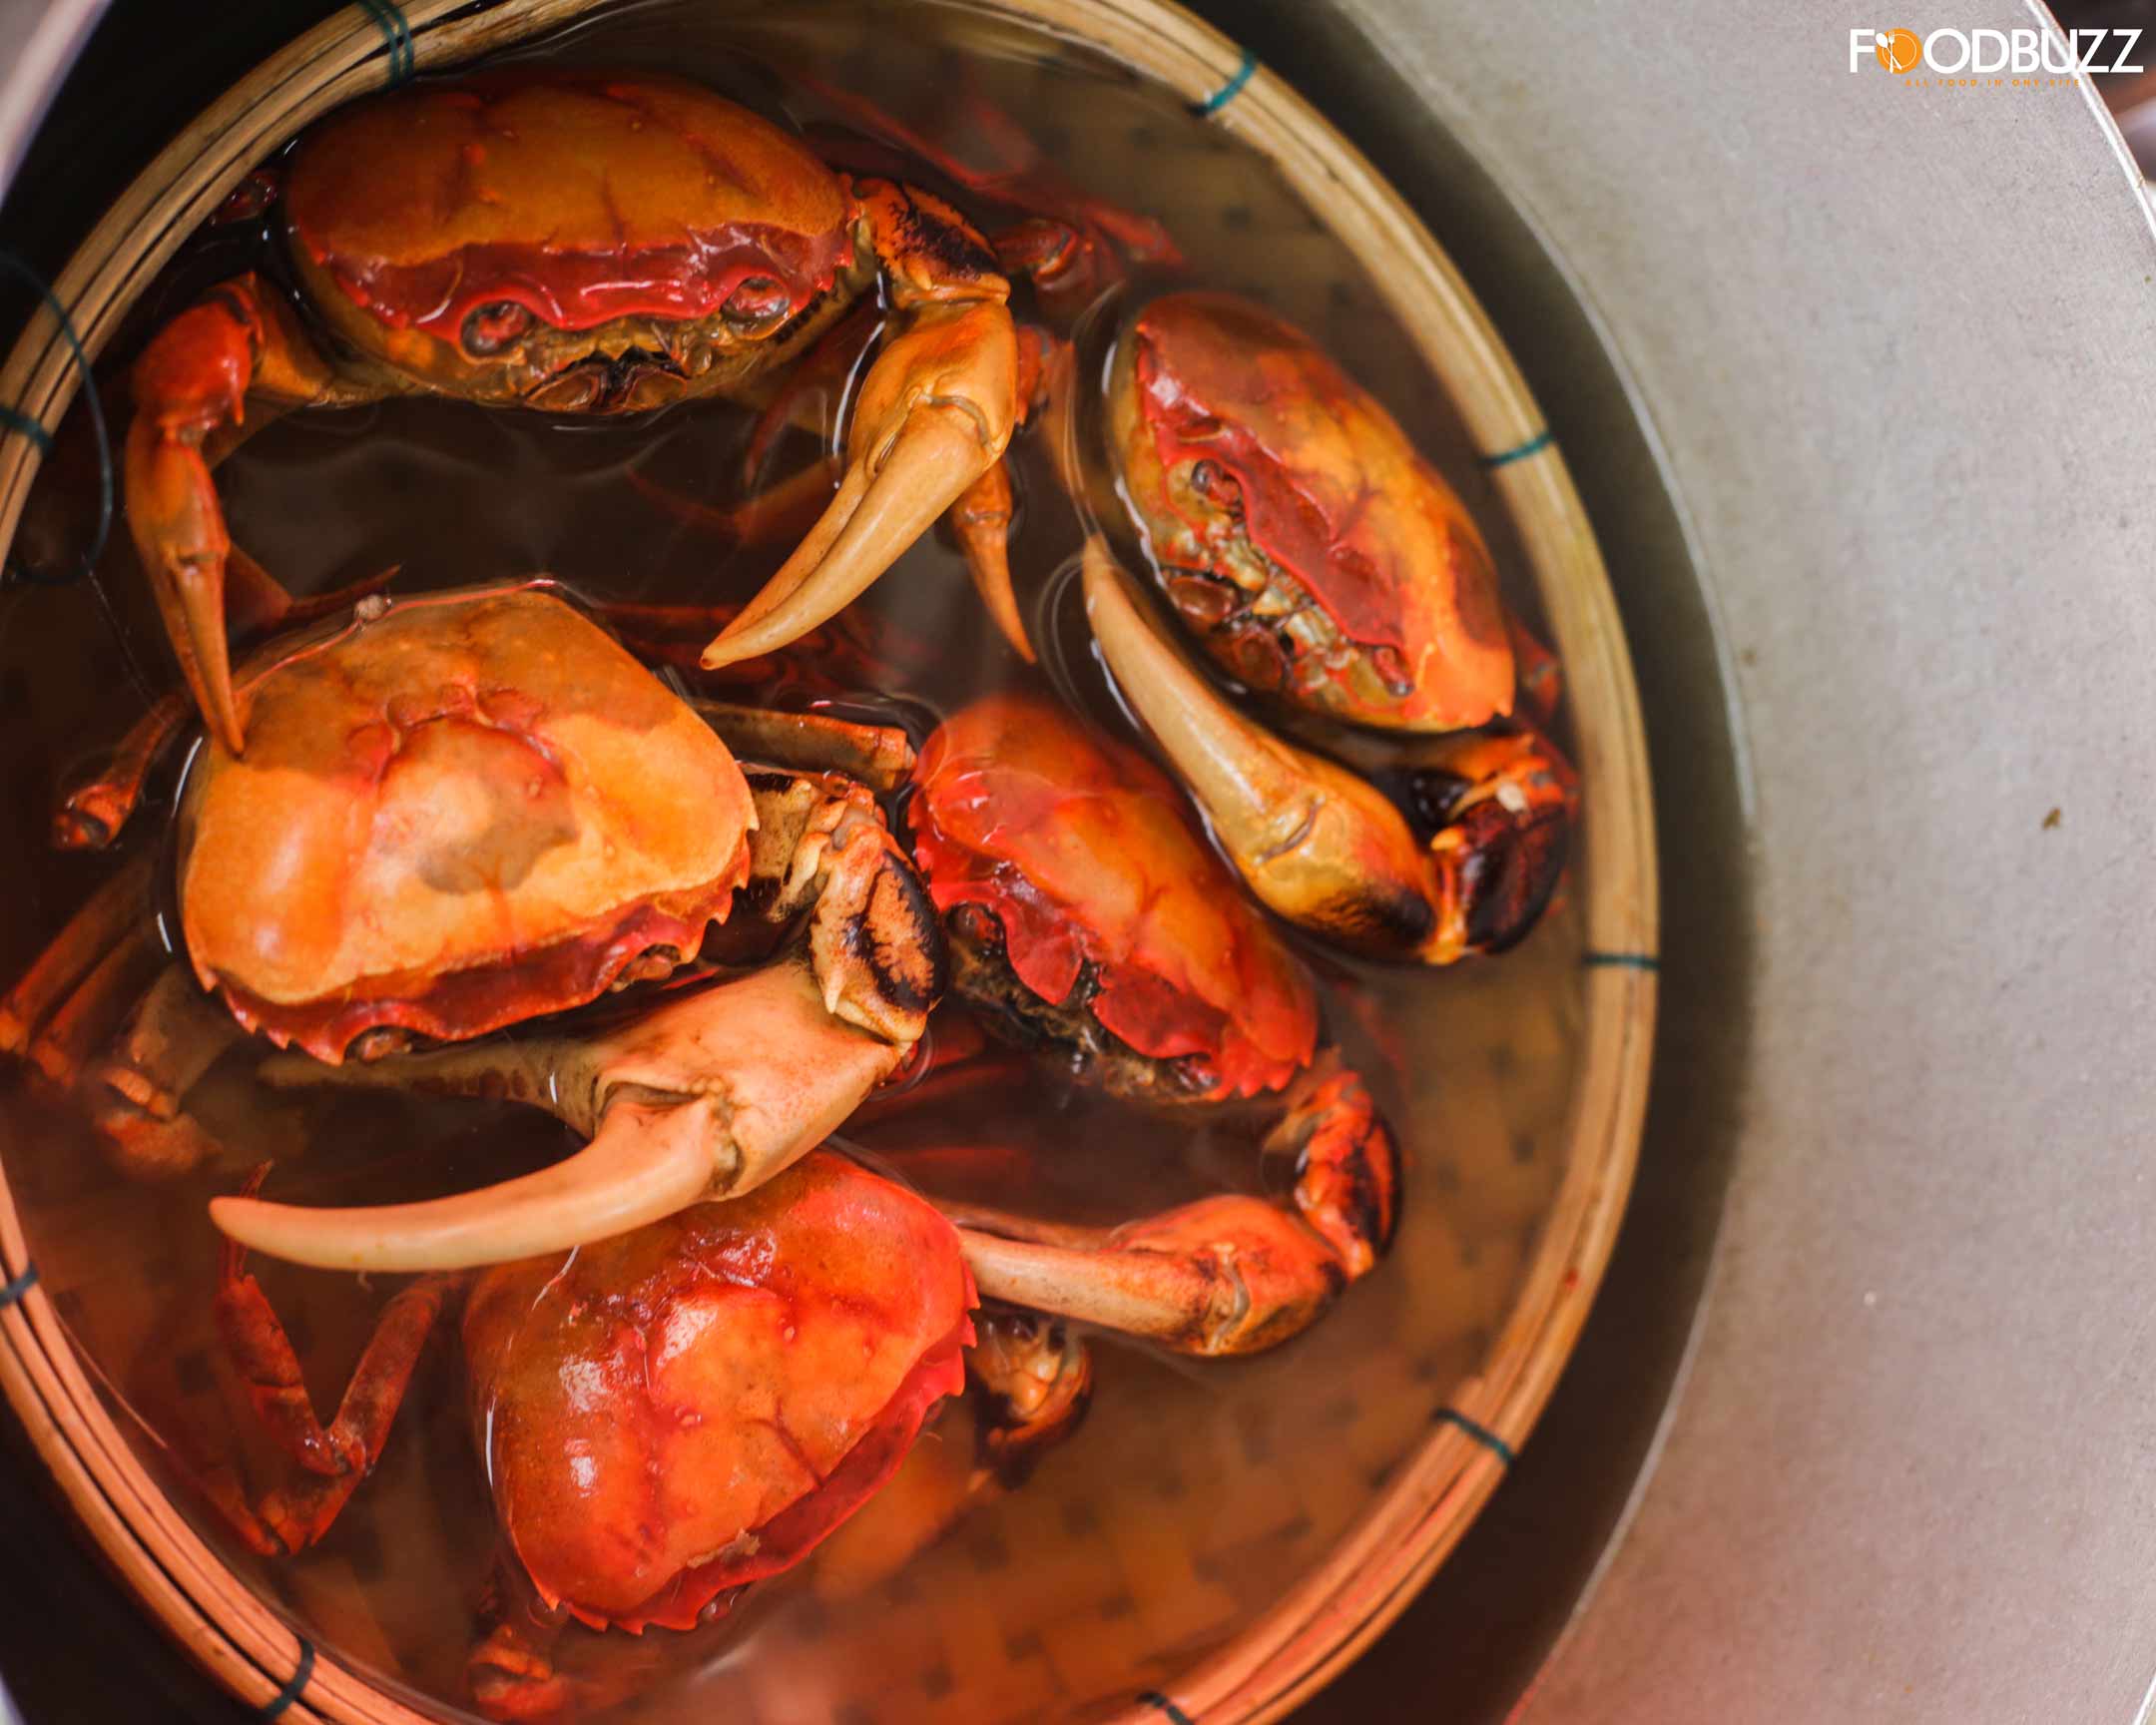 Boiled Rice Paddy Crab is a must-try.